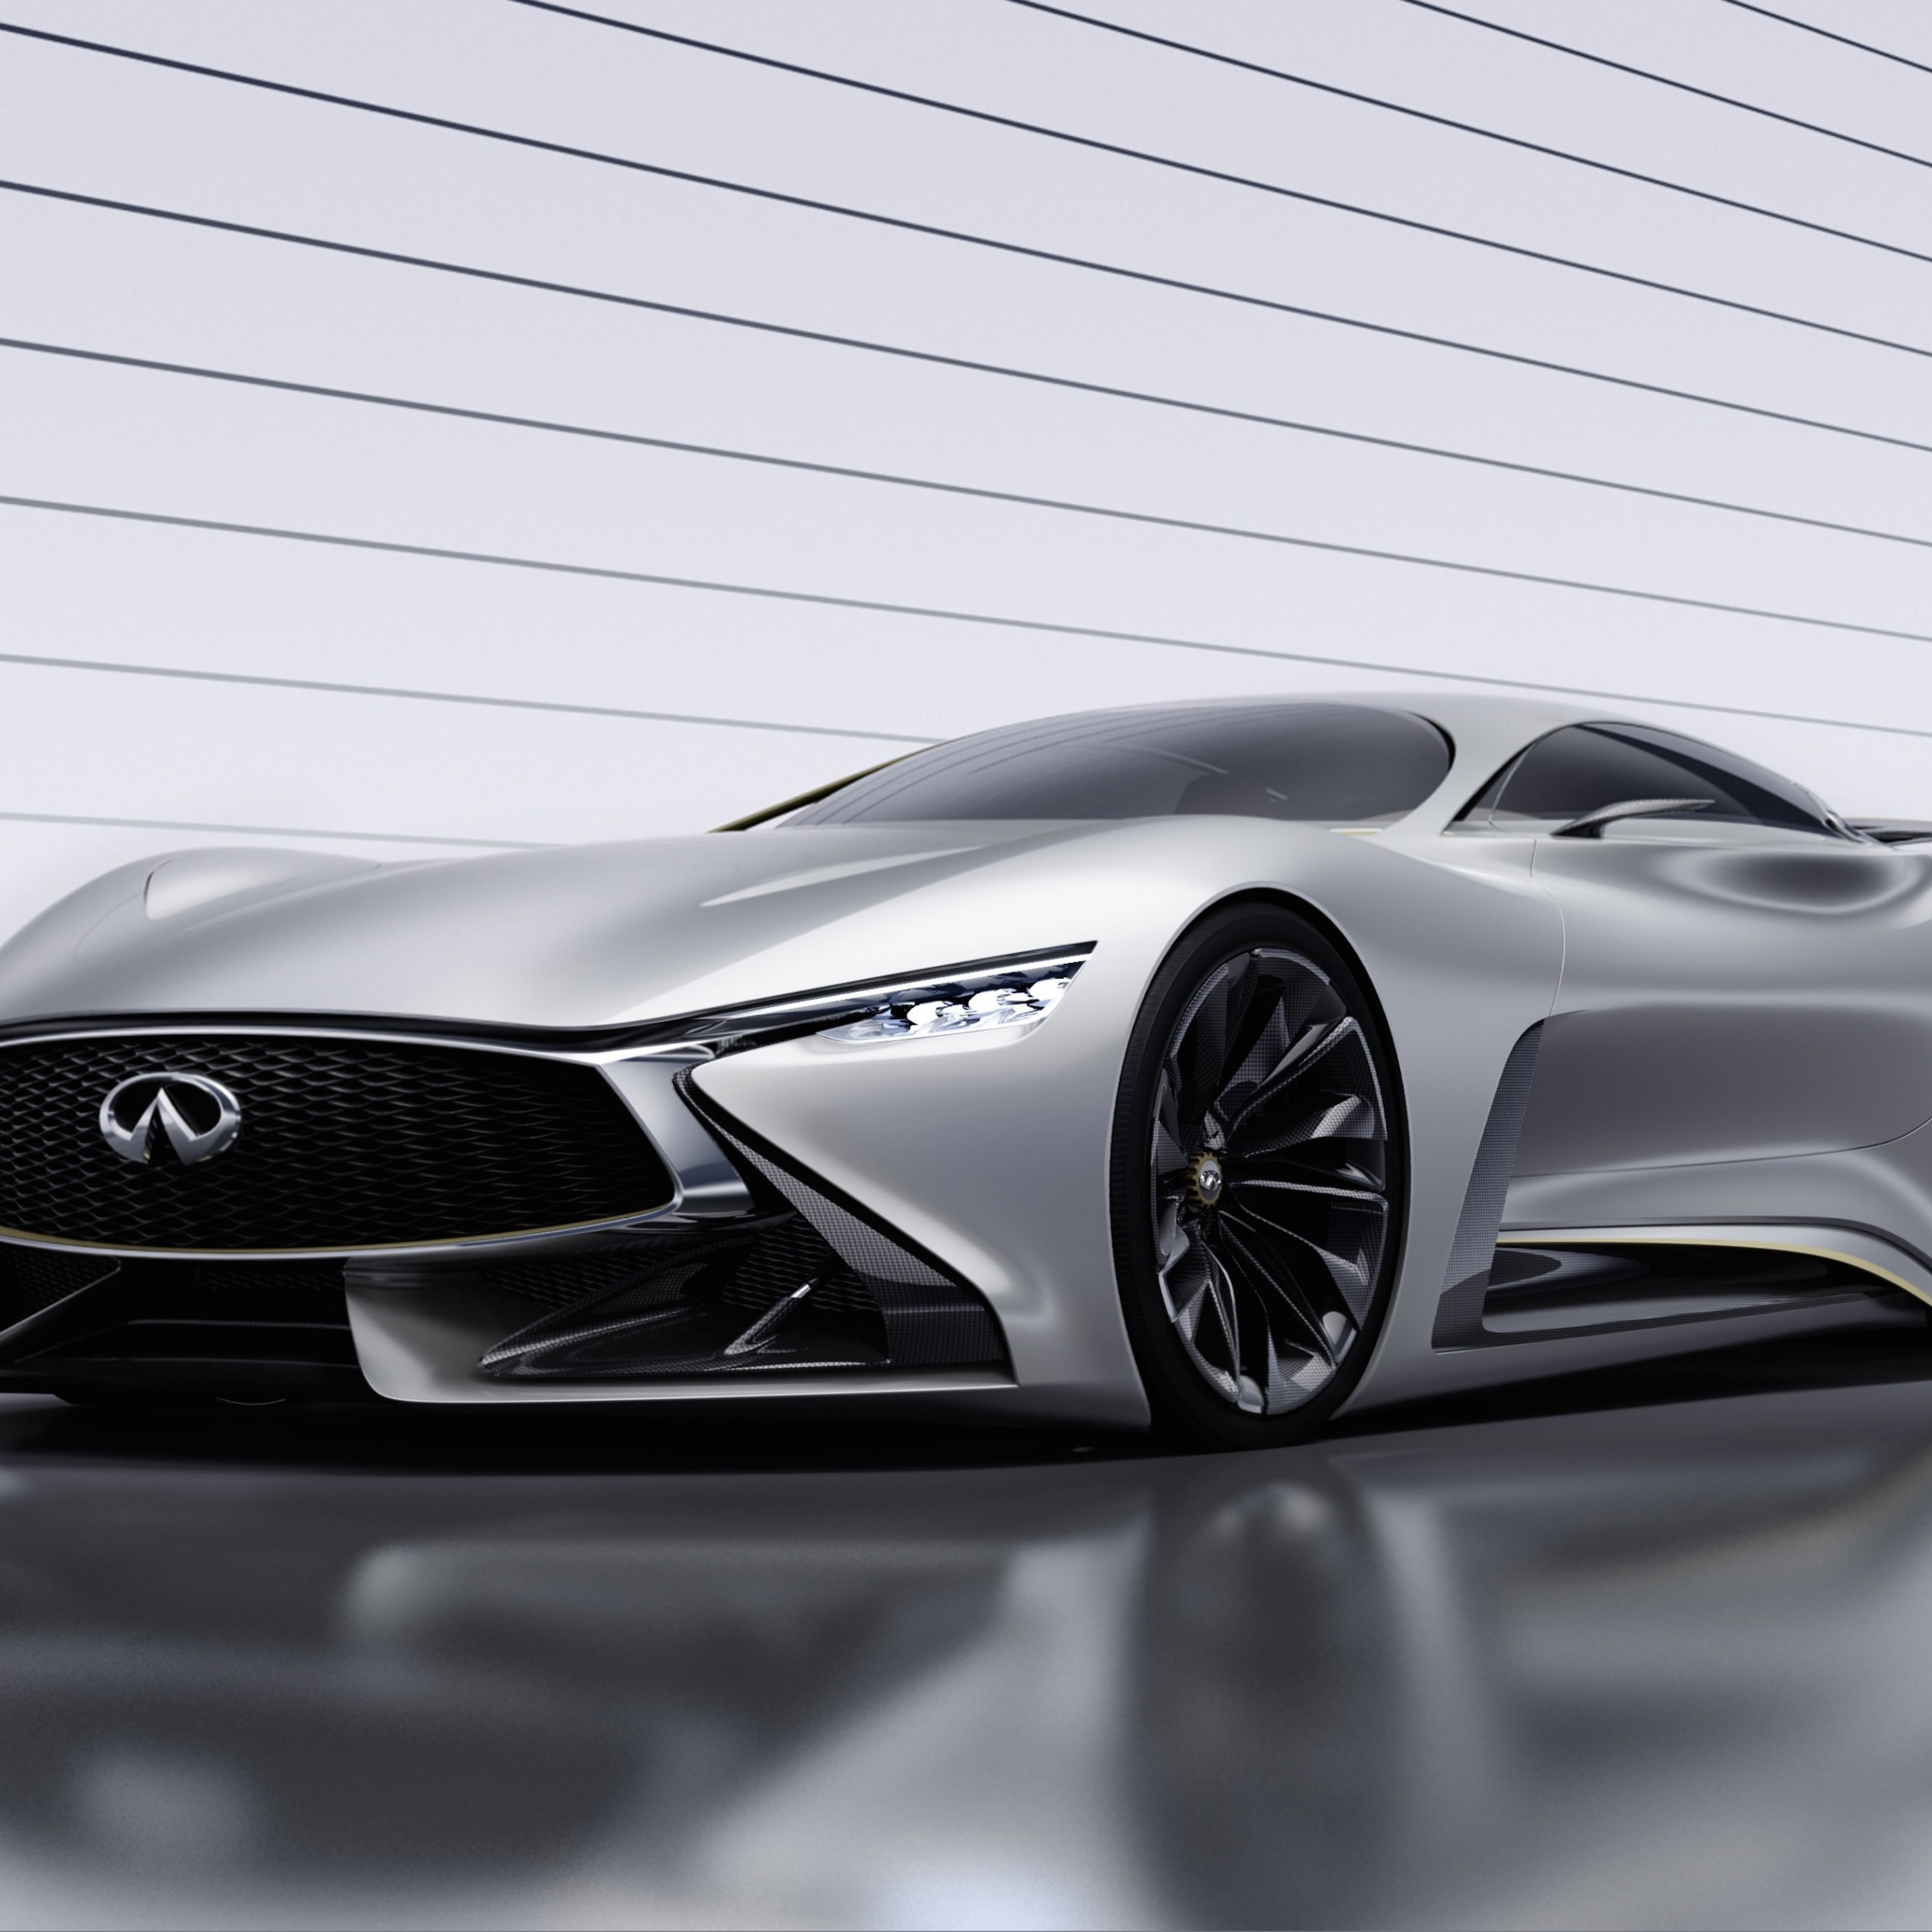 Infiniti Vision GT Concept Wallpaper for Apple iPad Air